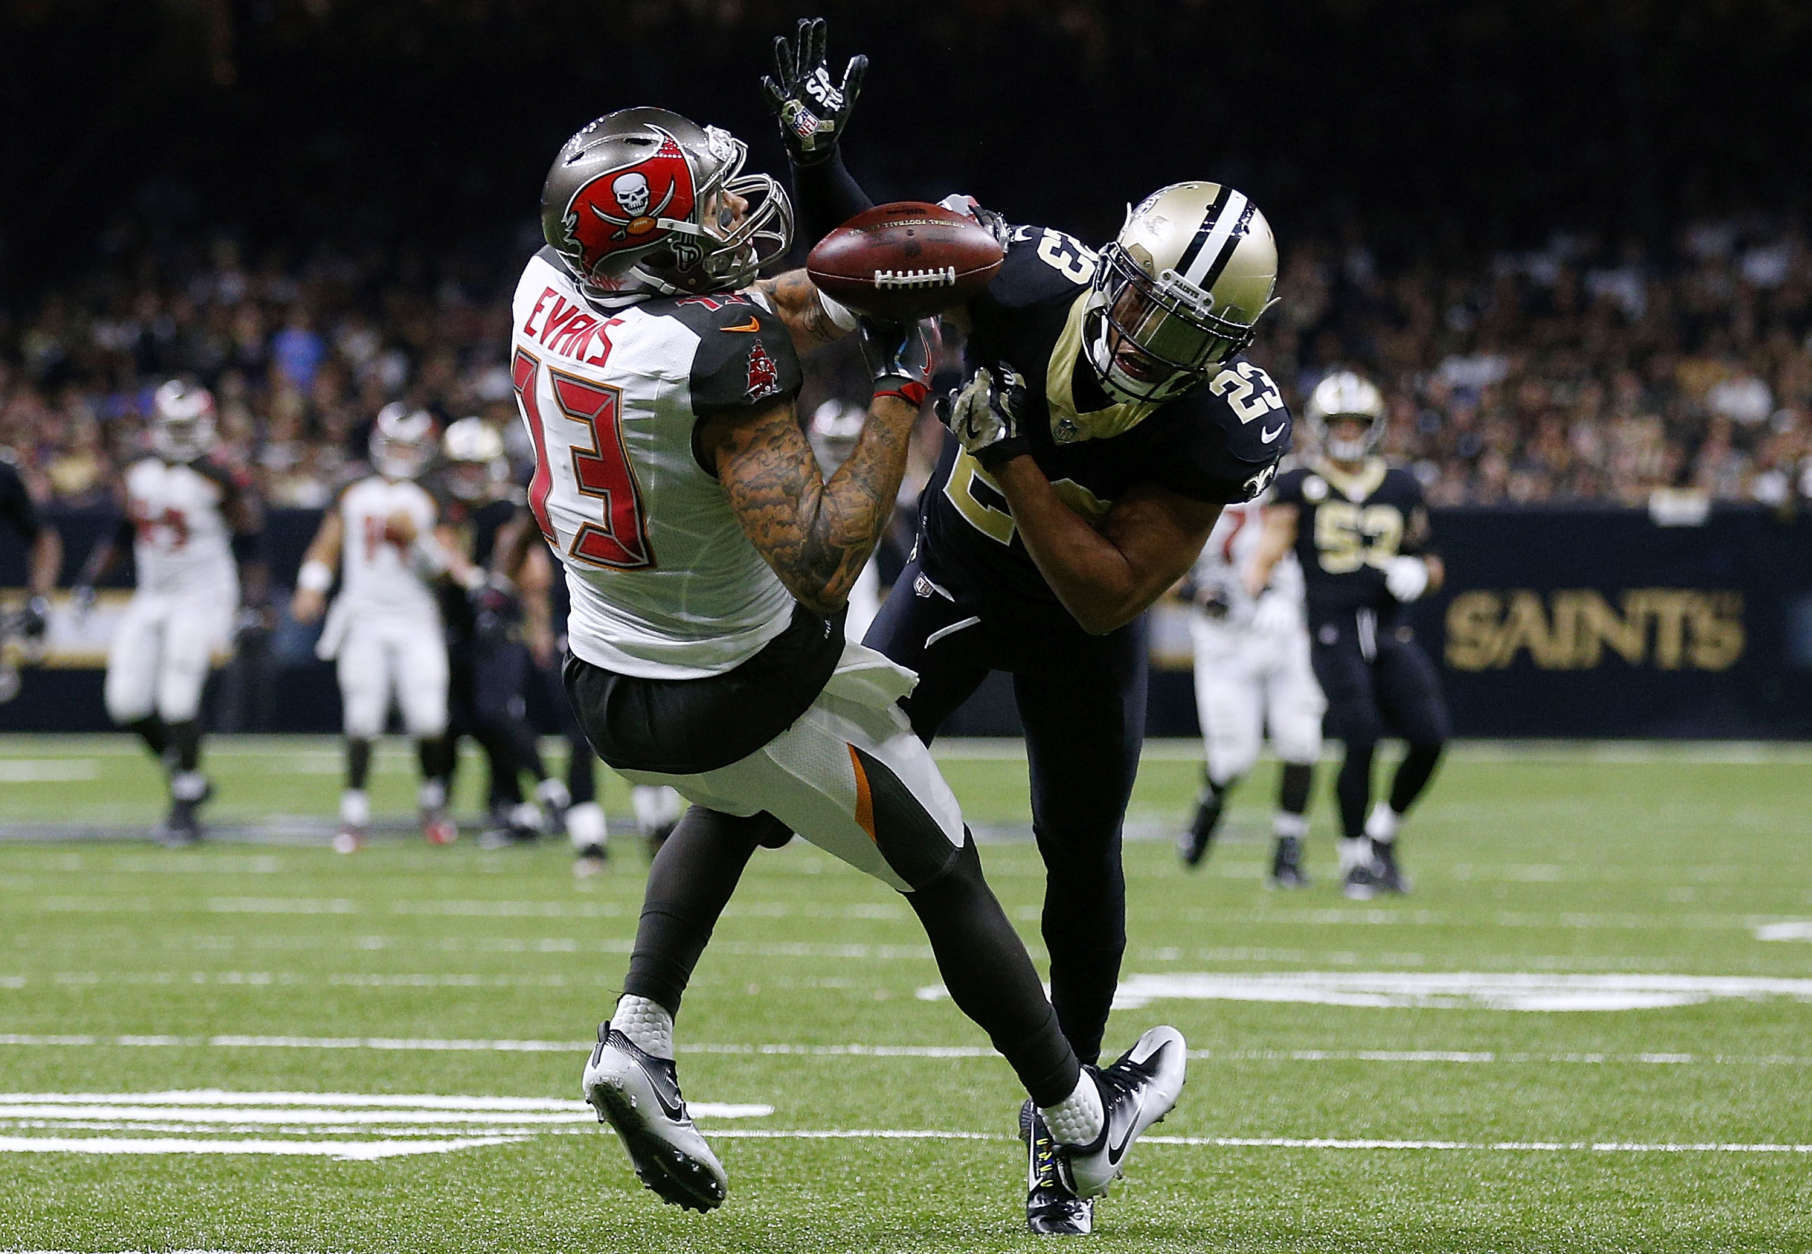 NEW ORLEANS, LA - NOVEMBER 05:  Marshon Lattimore #23 of the New Orleans Saints breaks up a pass intended for Mike Evans #13 of the Tampa Bay Buccaneers during the second half of a game at Mercedes-Benz Superdome on November 5, 2017 in New Orleans, Louisiana.  (Photo by Jonathan Bachman/Getty Images)